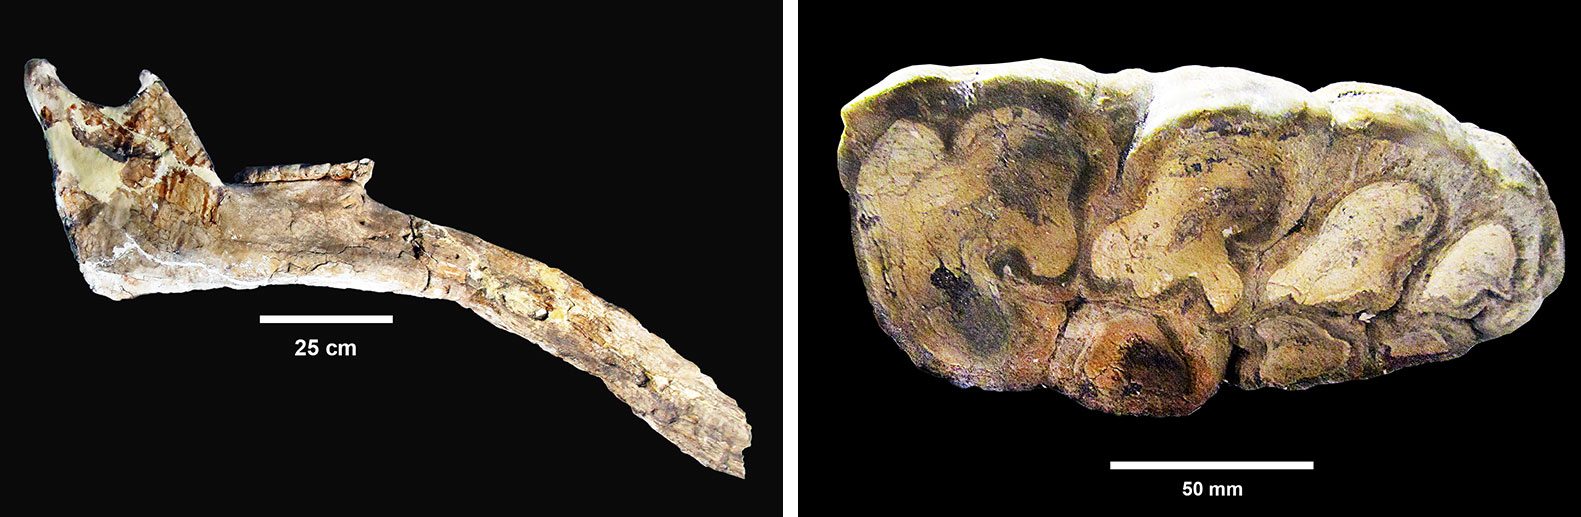 2-Panel figure showing photos of gomphothere fossils from Texas. Panel 1: Bizarre, extended lower jaw. Panel 2: Grinding surface of cusped tooth.